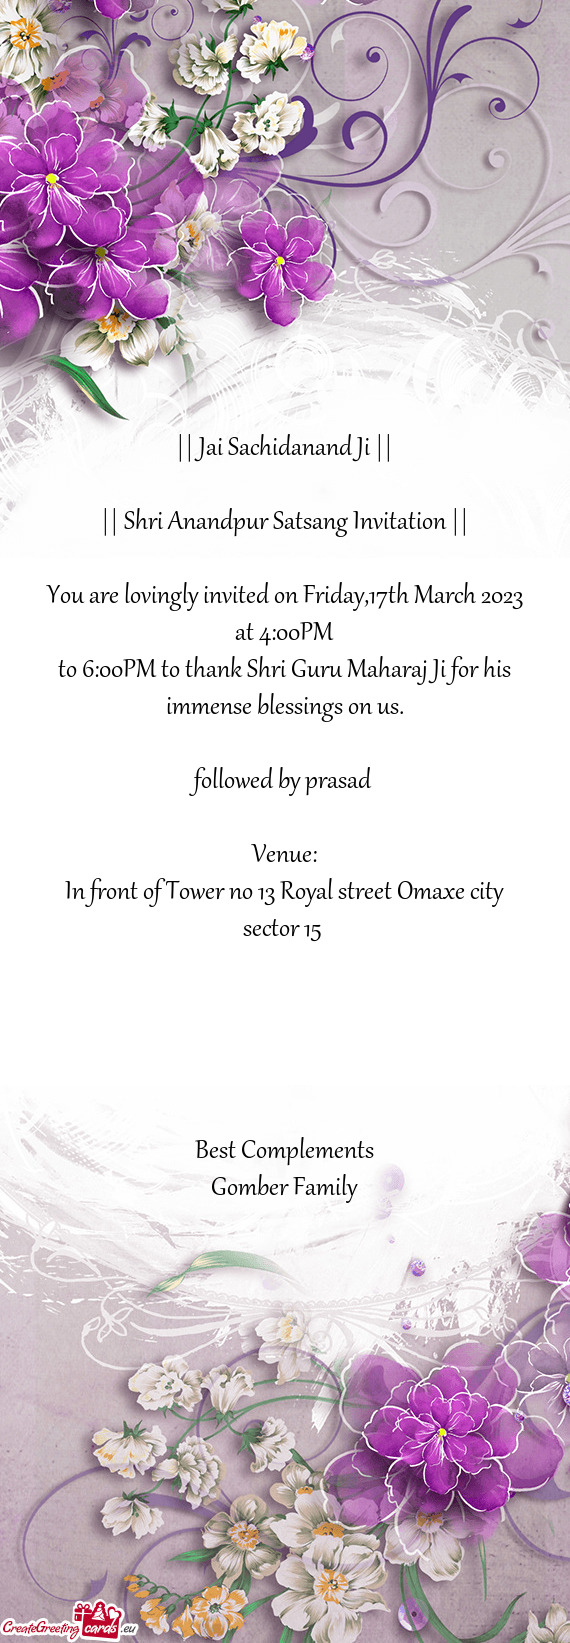 You are lovingly invited on Friday,17th March 2023 at 4:00PM